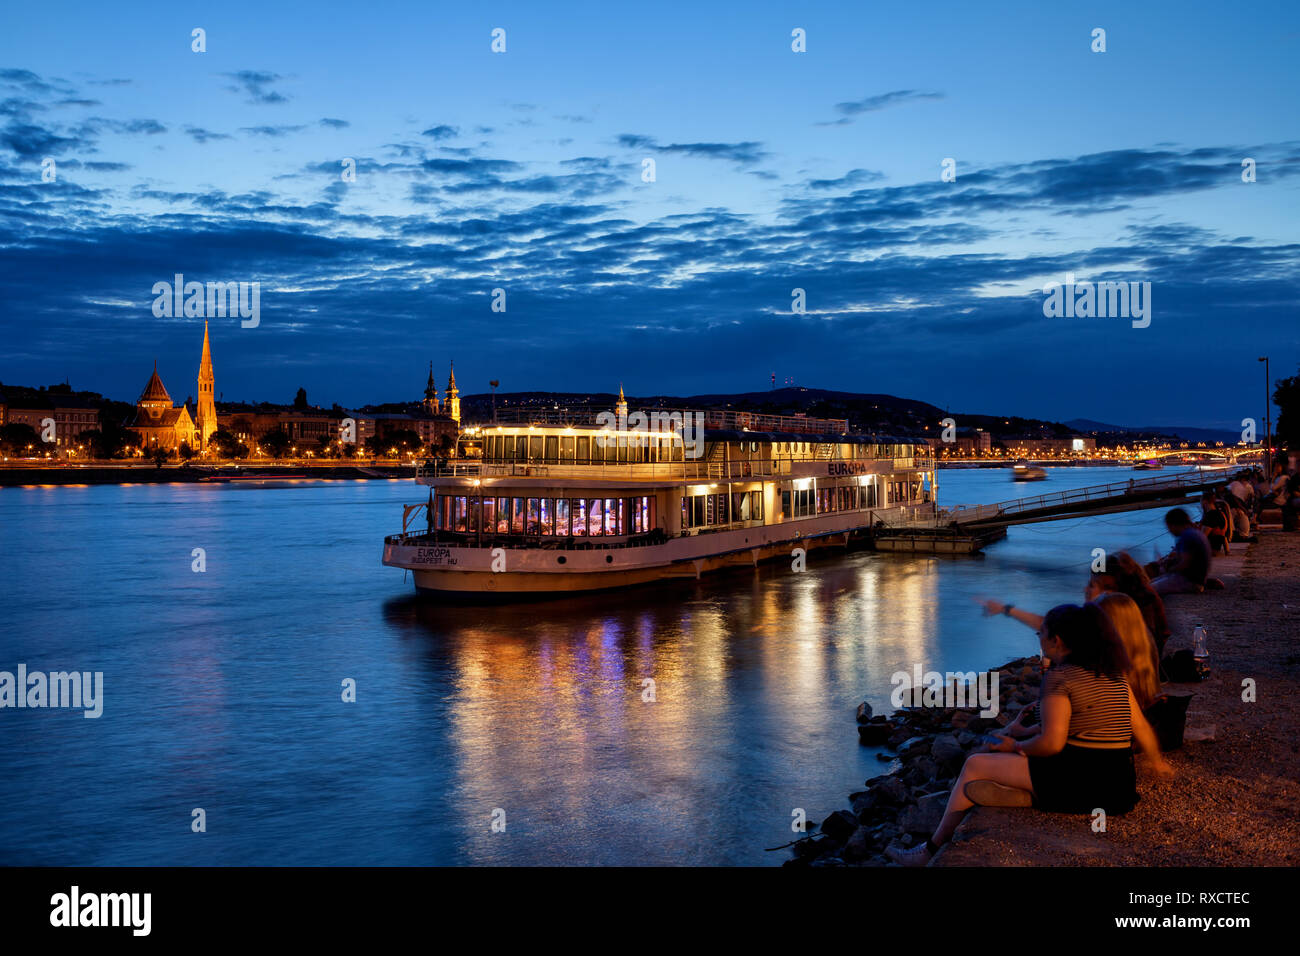 Hungary, city of Budapest, people hangout at Danube River waterfront on tranquil evening, cruise and dinner boat, view from Pest to Buda side. Stock Photo